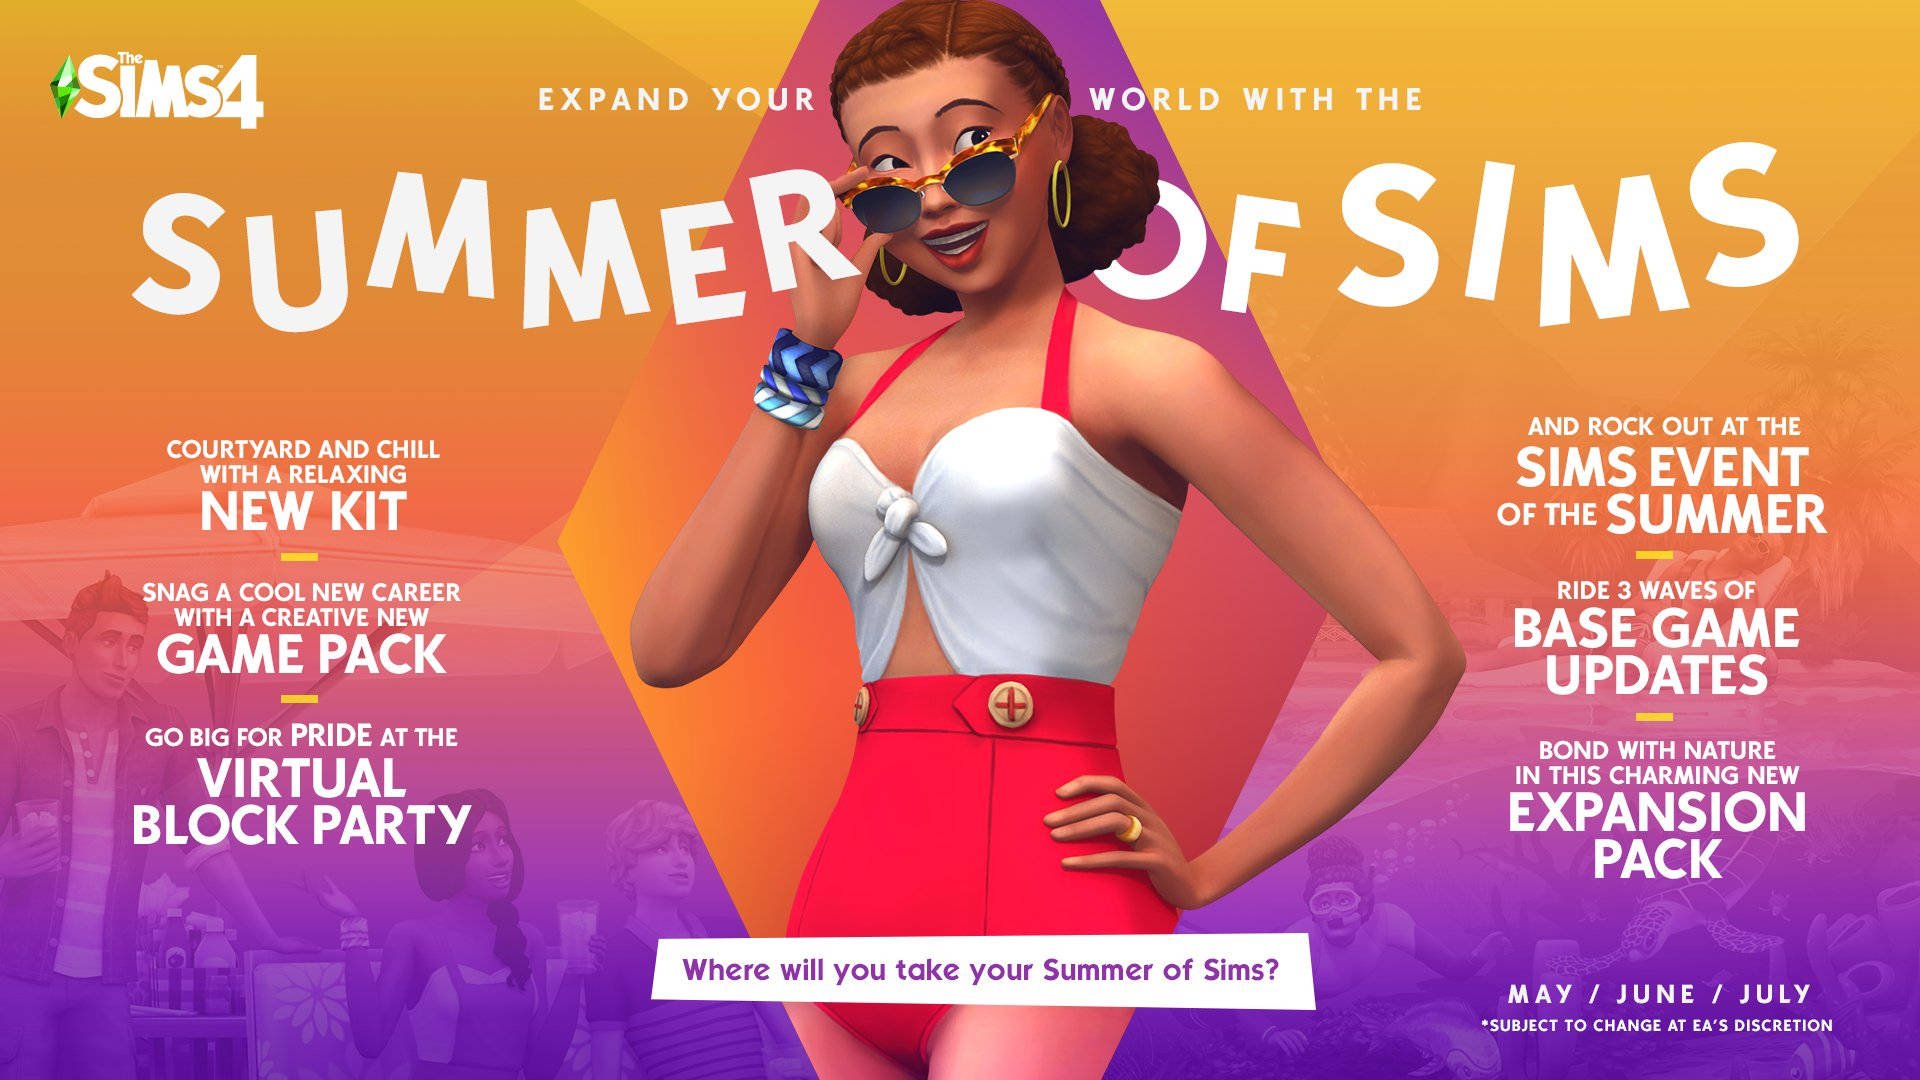 The Sims 4 Summer of Sims Details